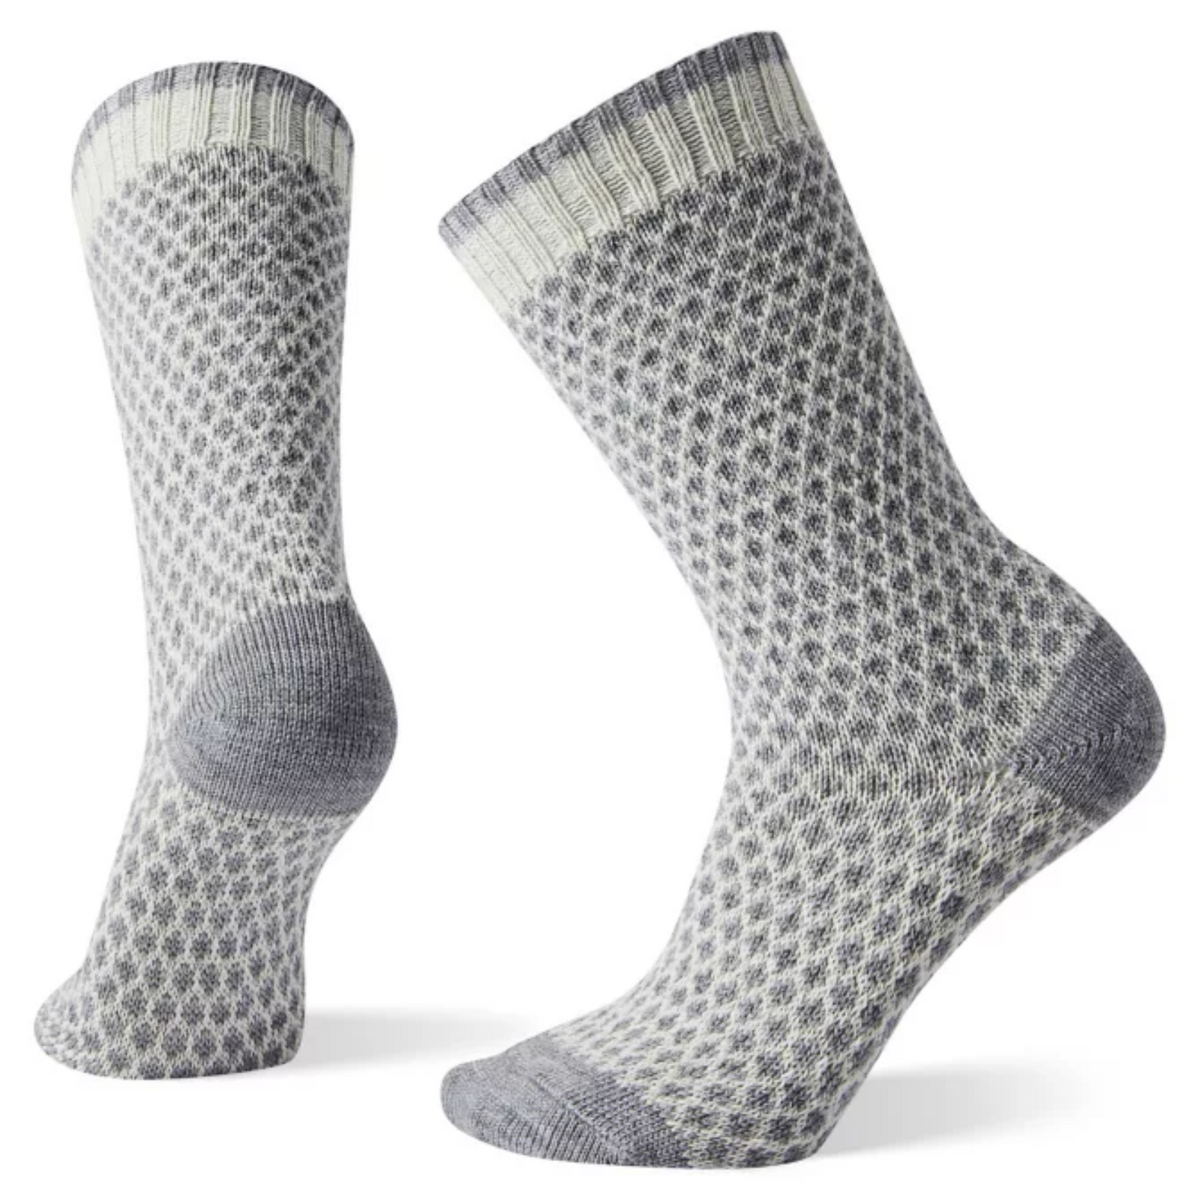 Smartwool Popcorn Polka Dot Crew women&#39;s sock featuring white and gray pattern all over with gray toes and heel. Socks shown on display feet. 